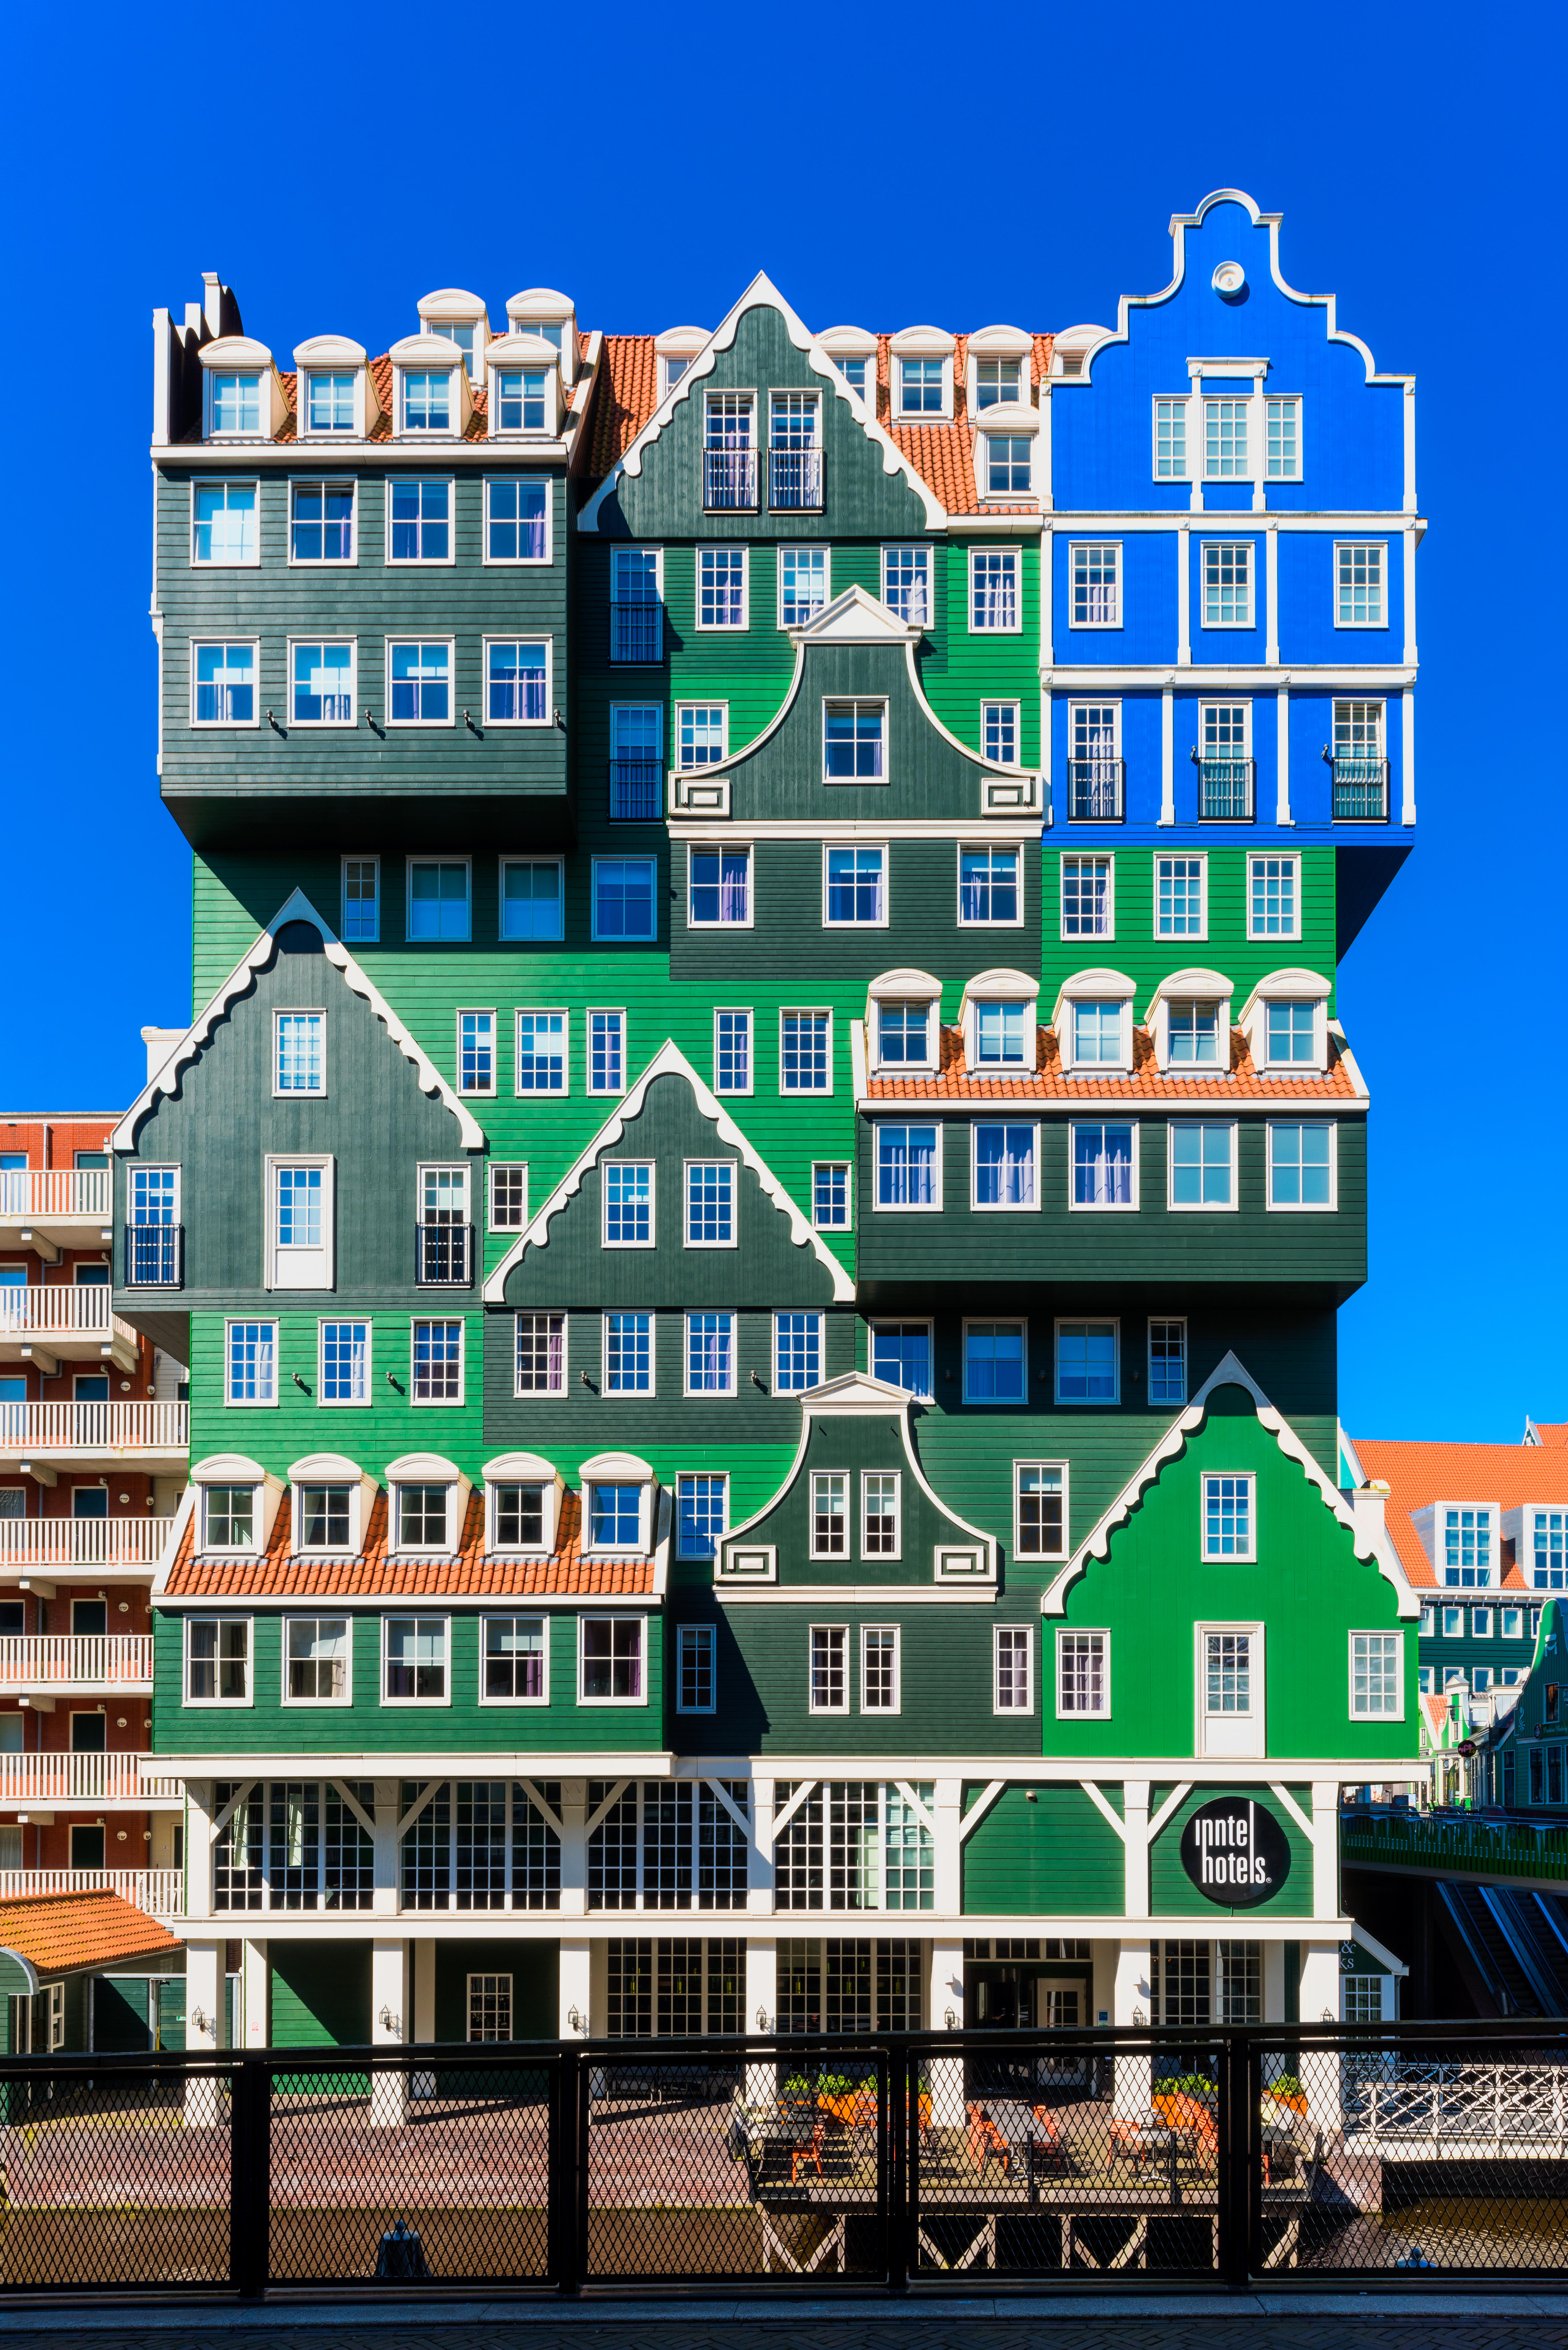 Zaandam has been dubbed a real-life Lego village by holidaymakers in recent years